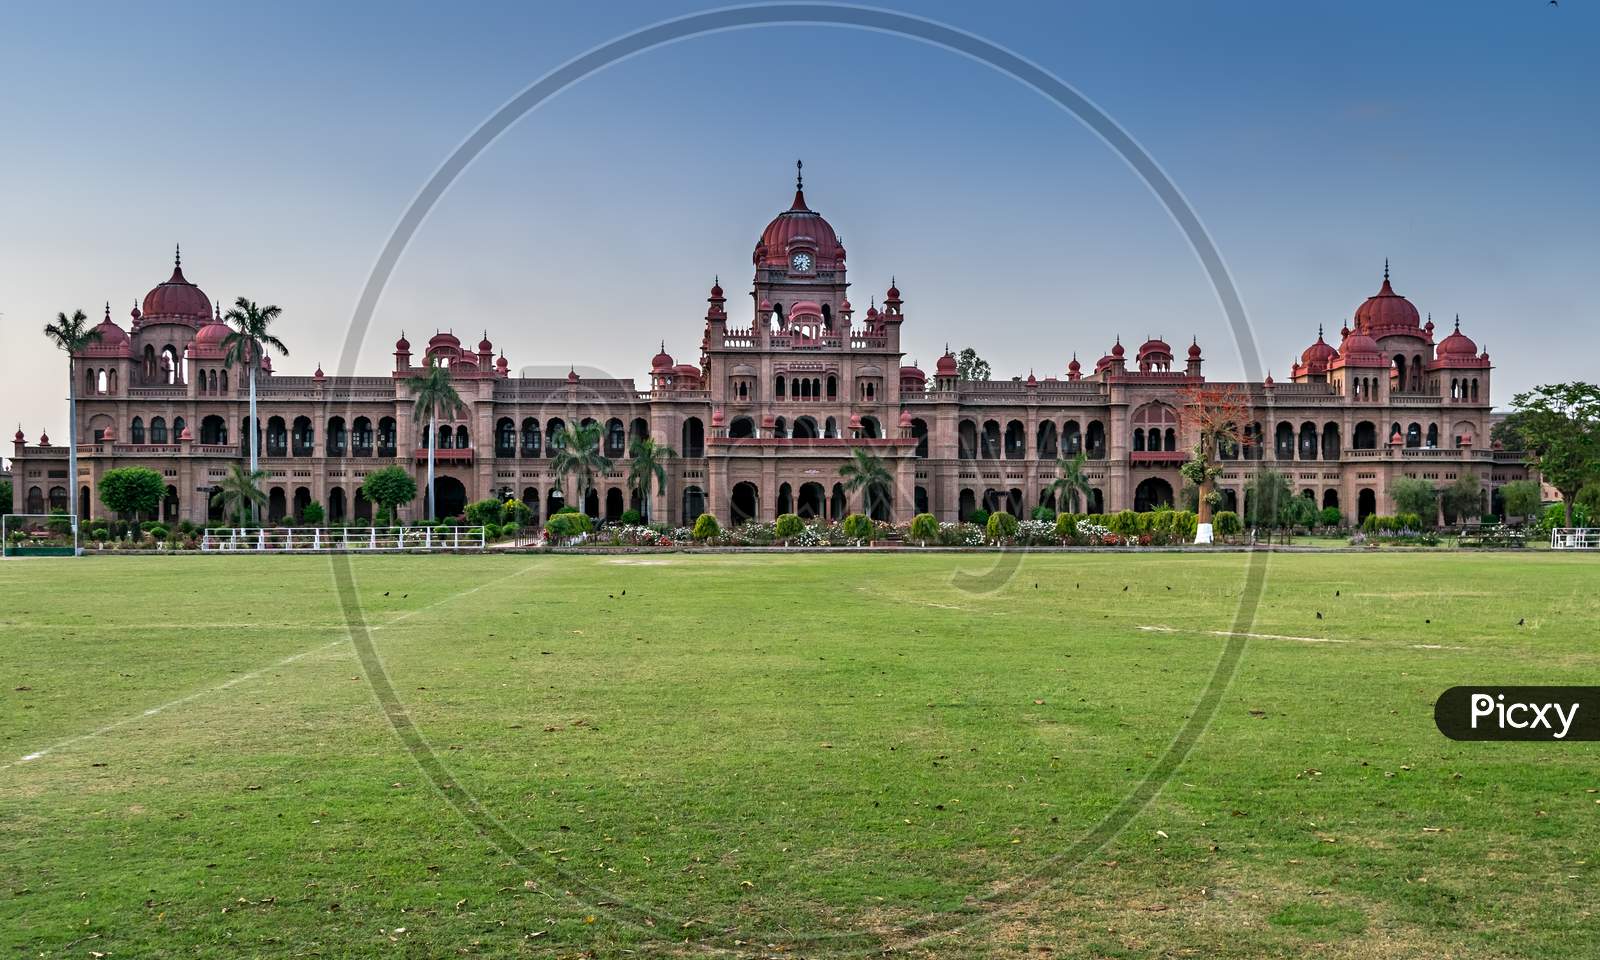 Khalsa College-Educational Institution In The Northern Indian City Of Amritsar.